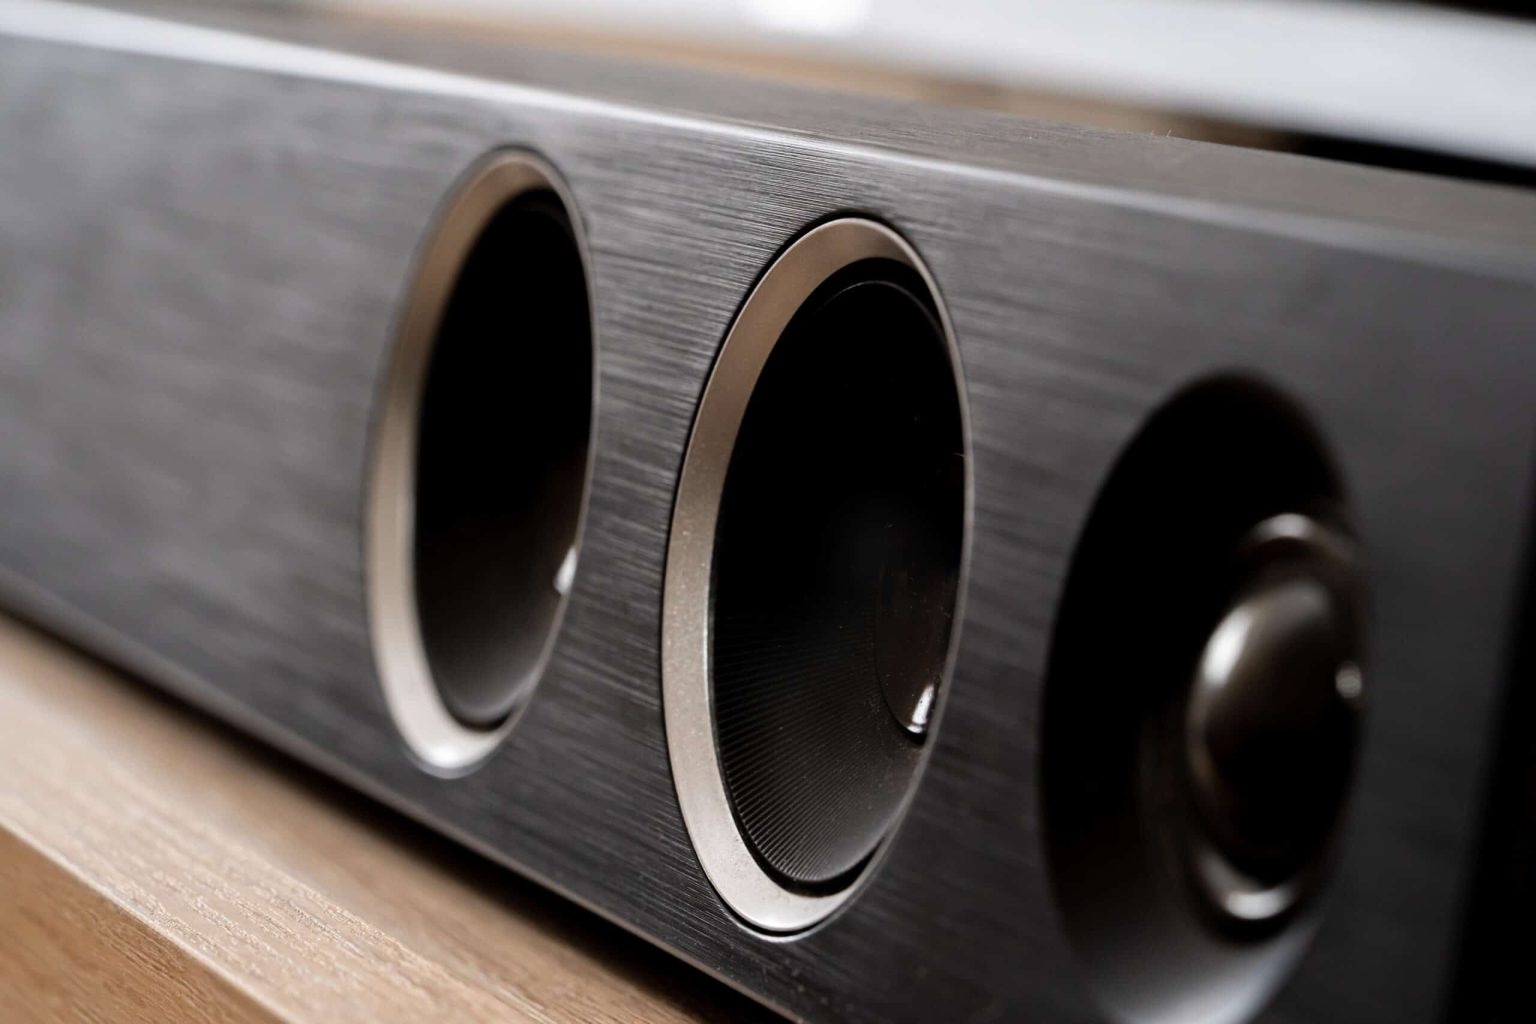 Hello My Friend! Here Are the Top Soundbars You Can Get at Walmart